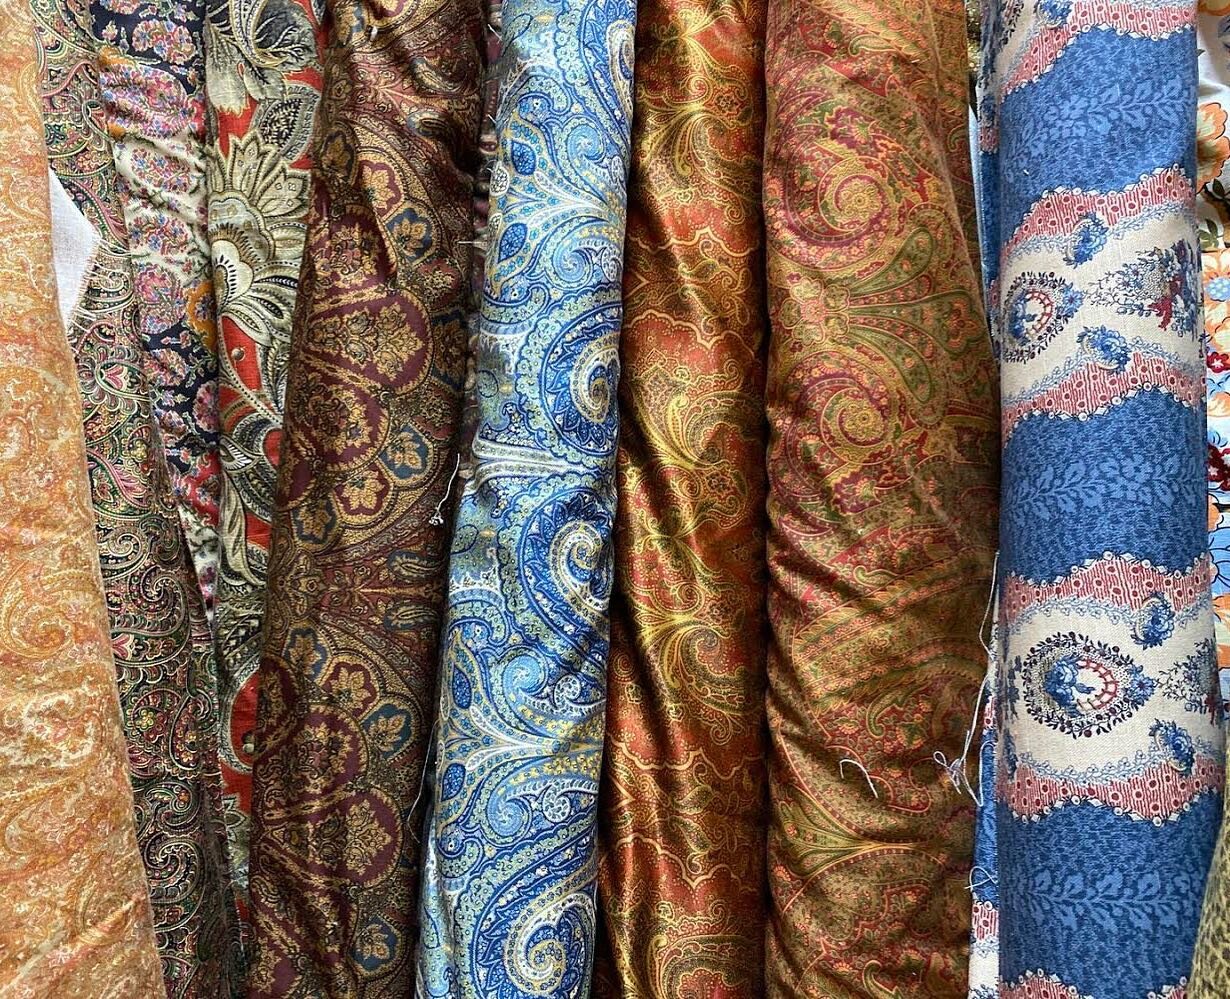 We have high end rolls from some of the top fabric houses in the world! Stop in and check out our selection today!